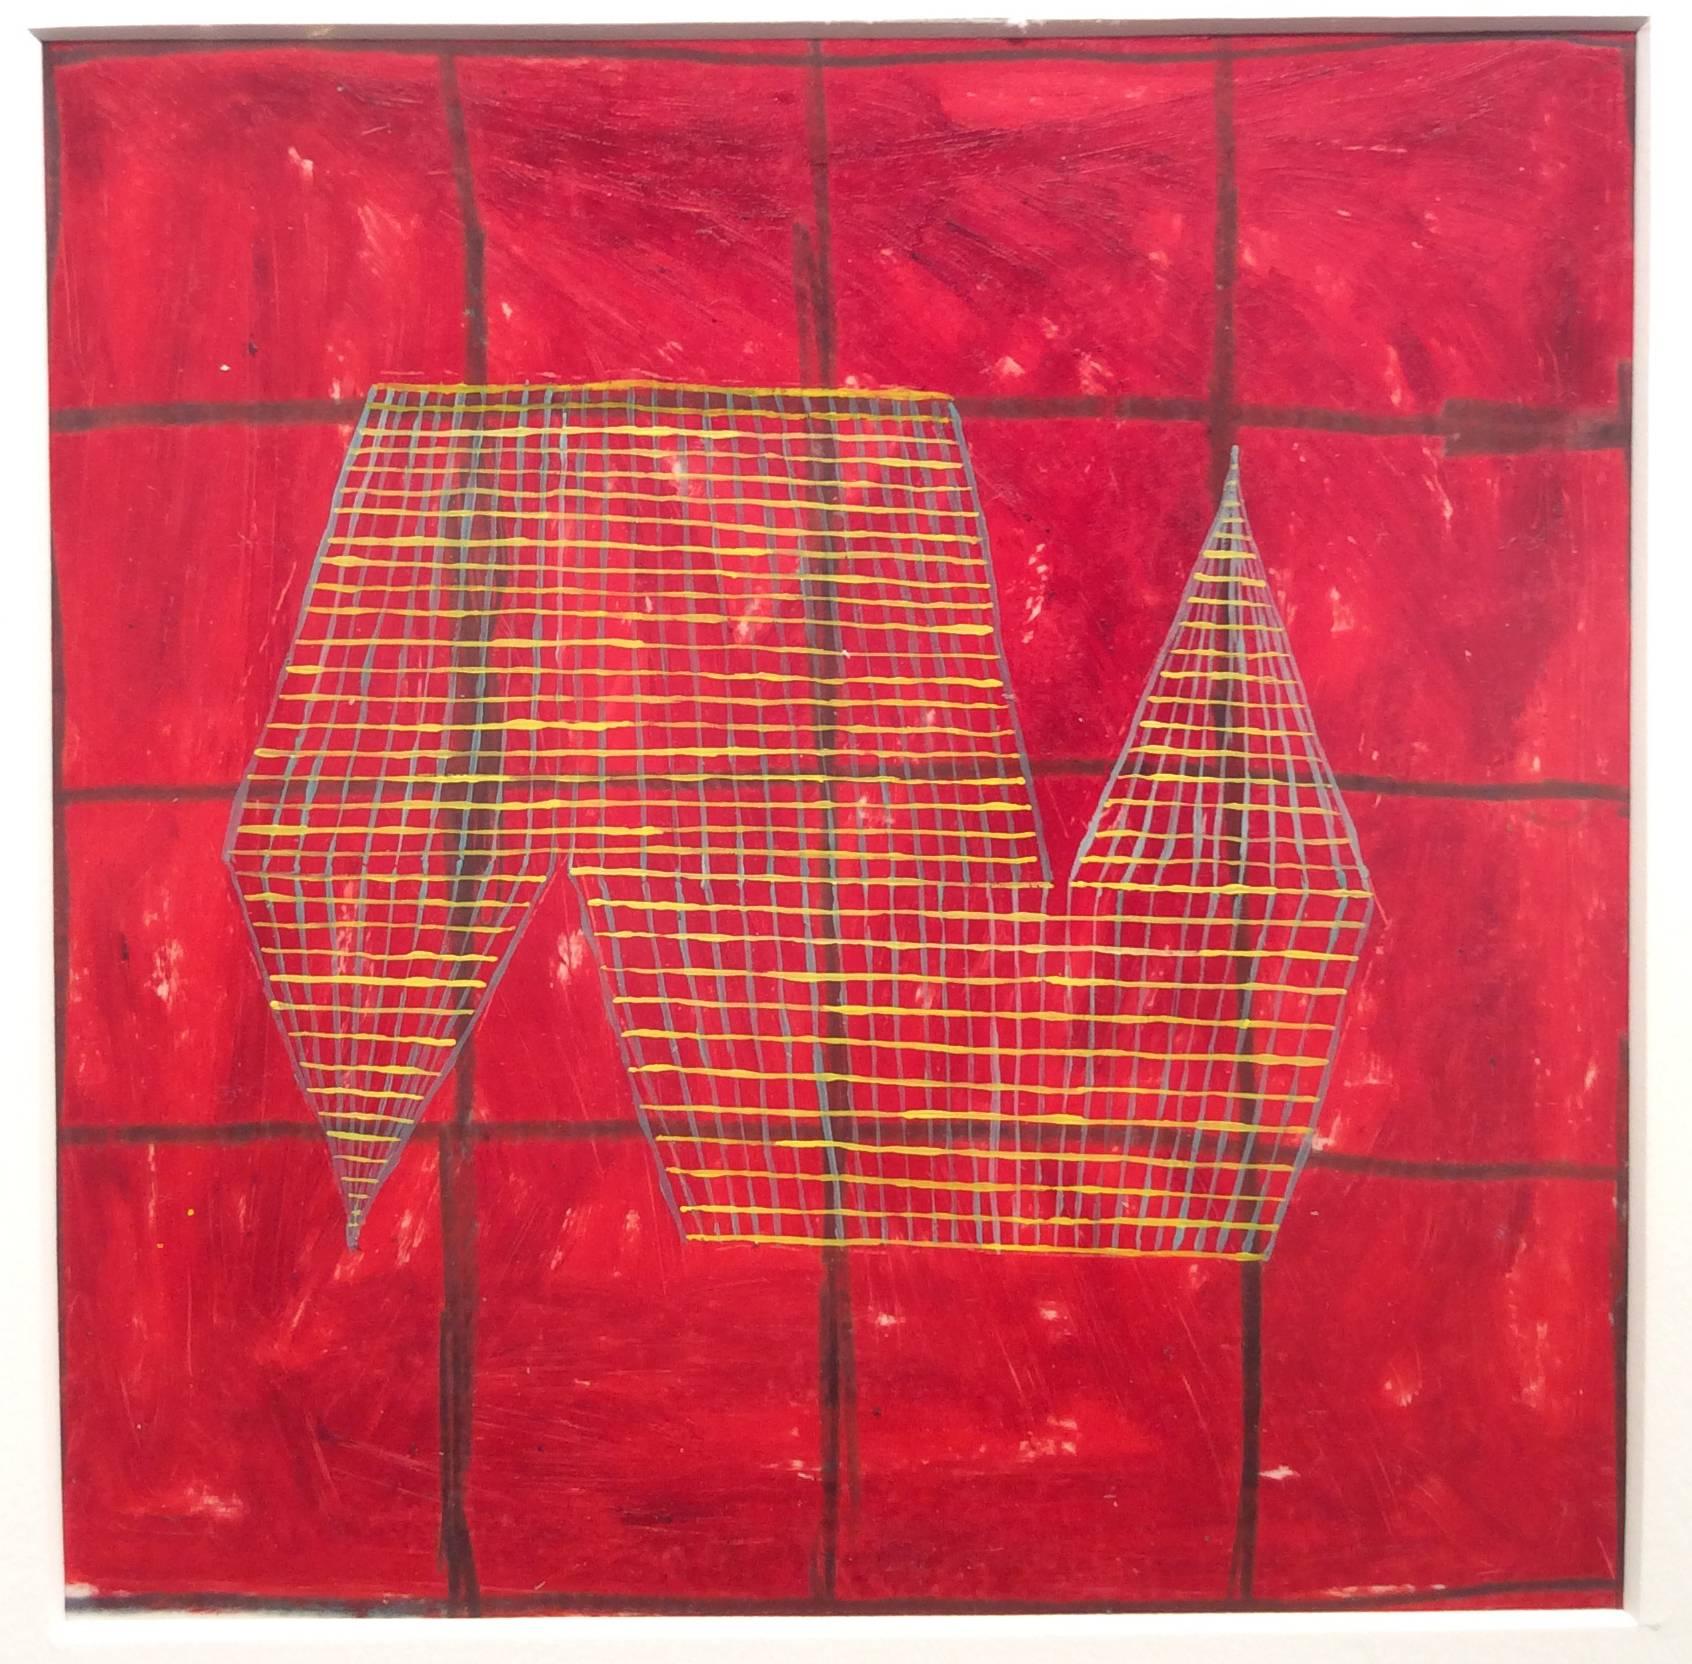 Donise English Abstract Painting - 7A (Modern, Abstract Red & Yellow Grid Painting on Vellum in Square White Frame)